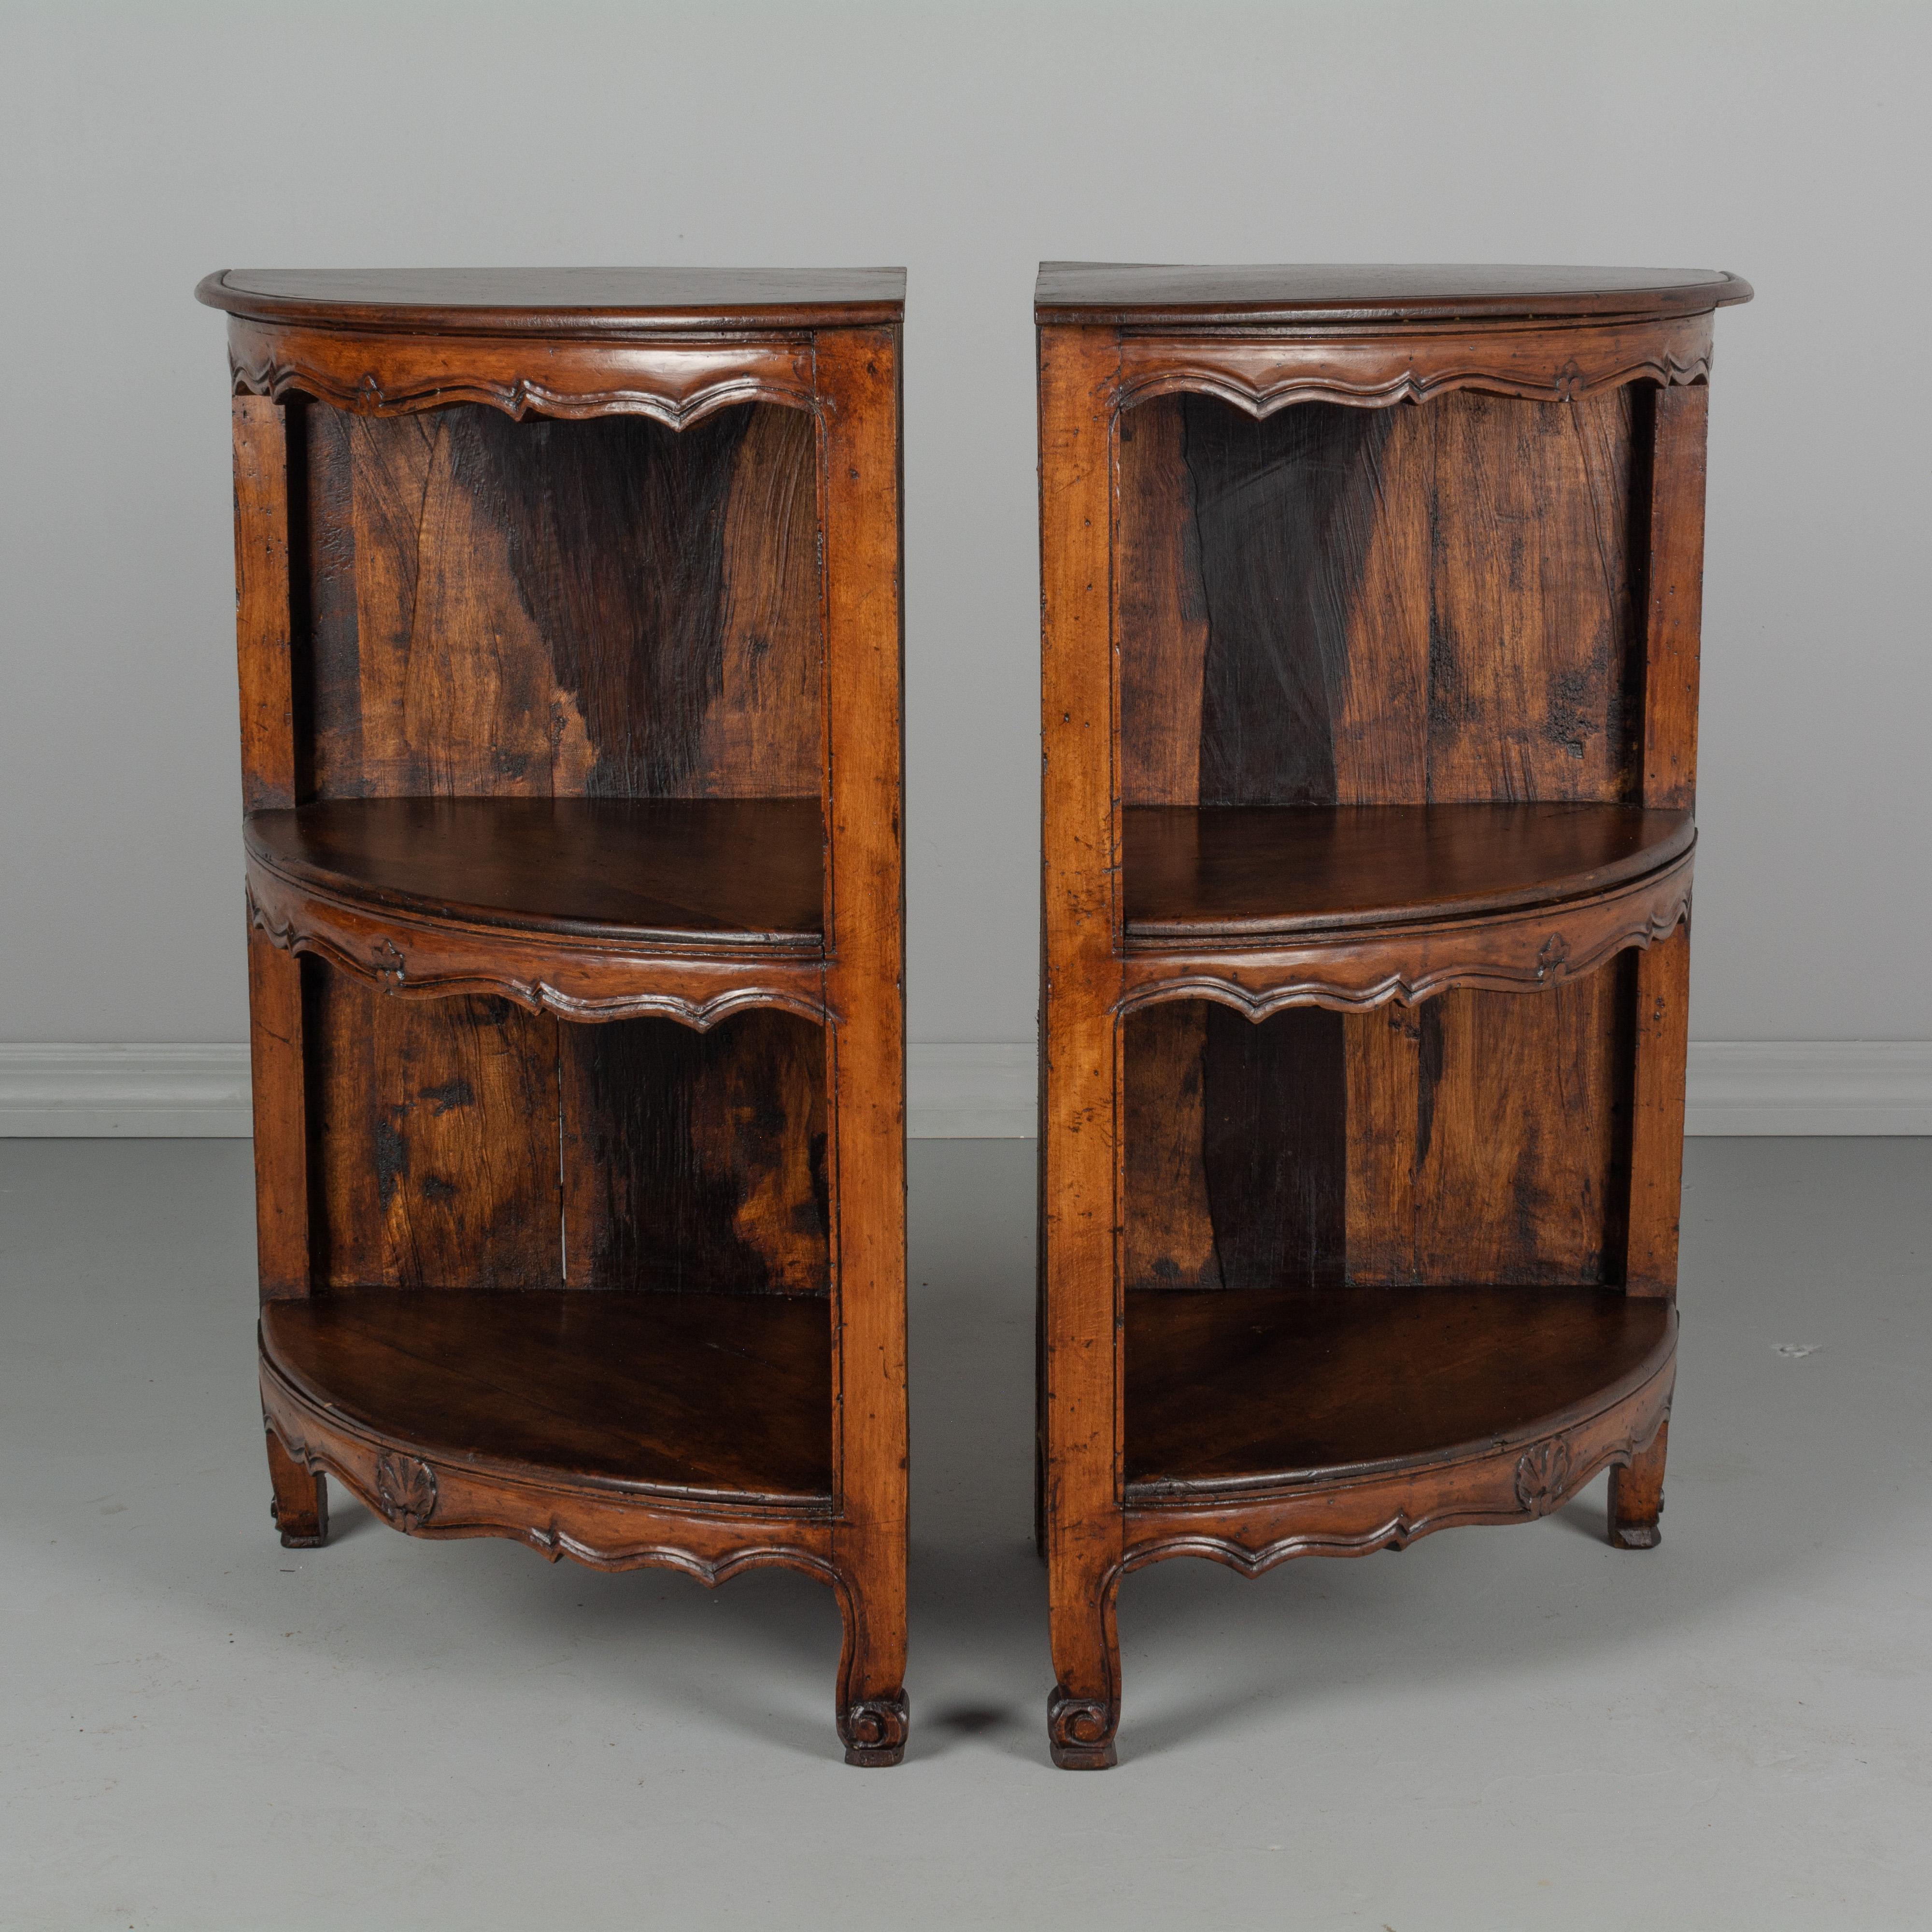 A pair of Country French Louis XV style corner shelves made of walnut with hand-carved decoration and scroll toes. A versatile pair of side tables that may be used as a small console when drawn together, or as small bedside tables when separated.